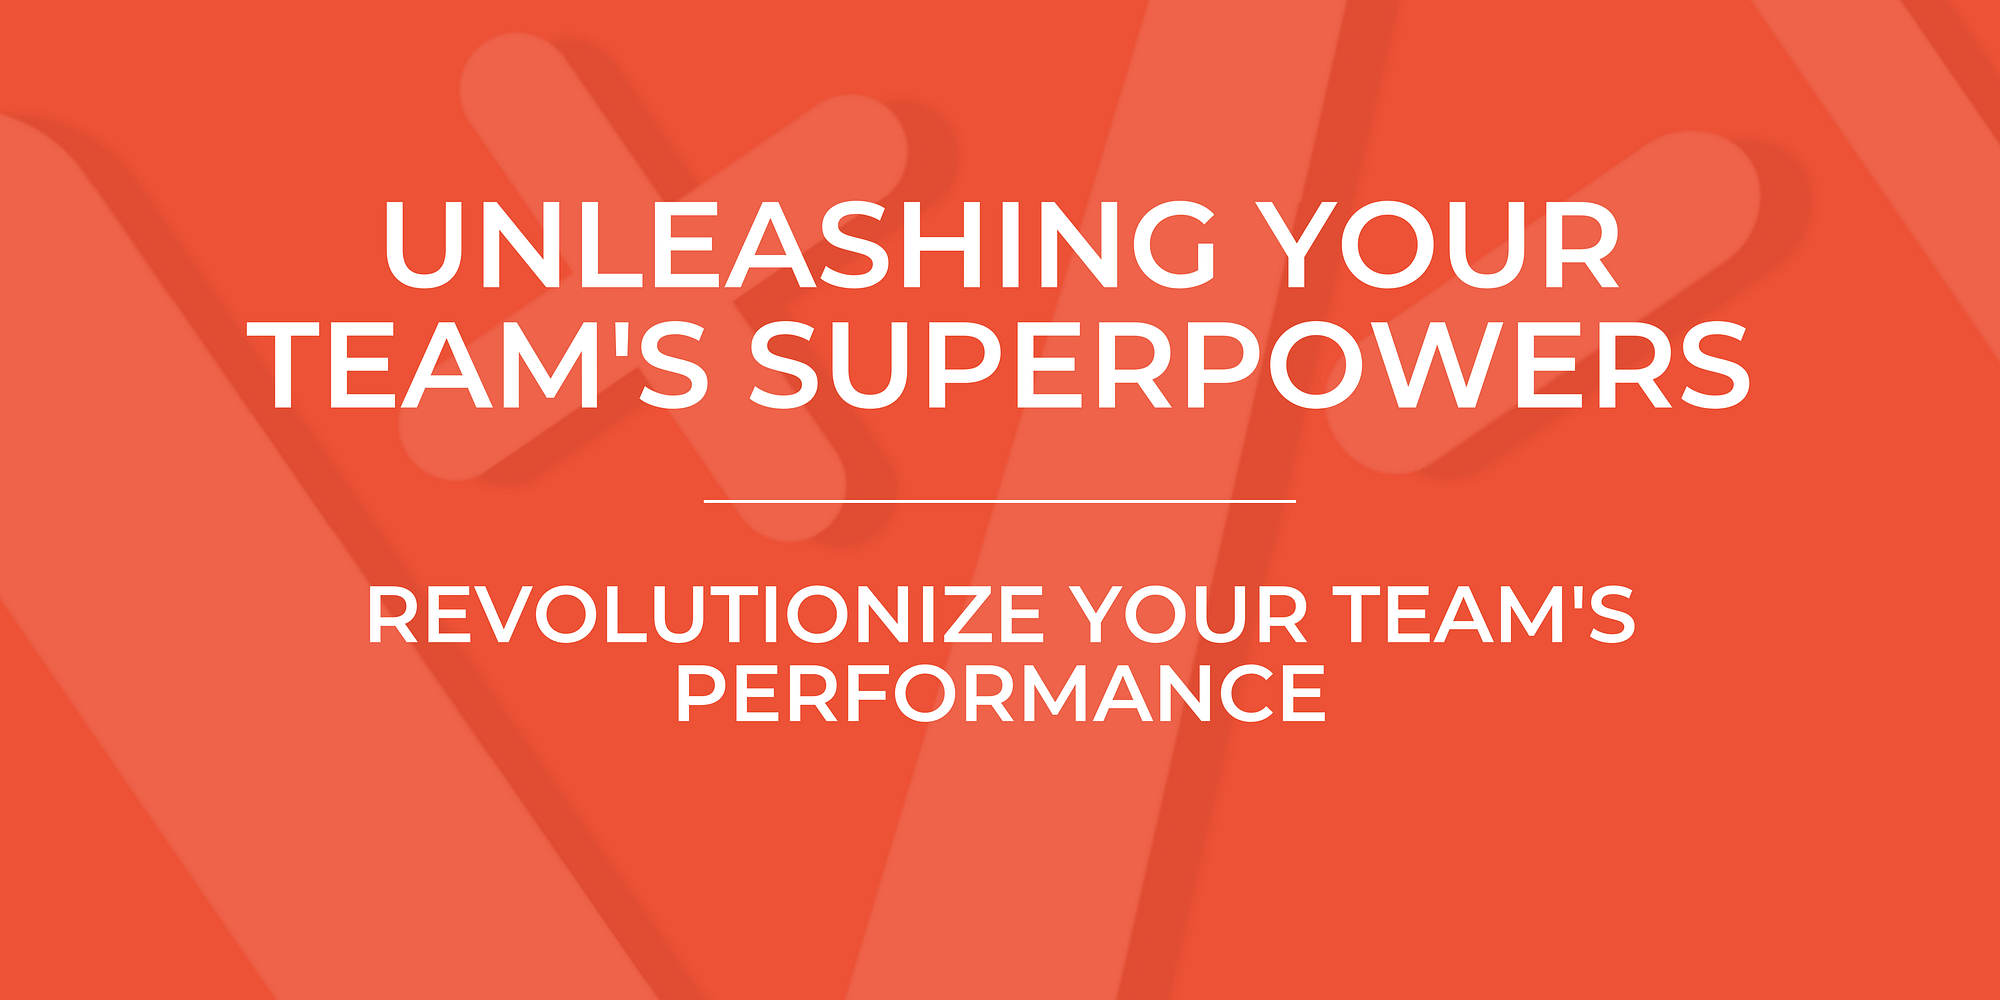 Unleashing Your Team's Superpowers: Revolutionize Your Team’s Performance